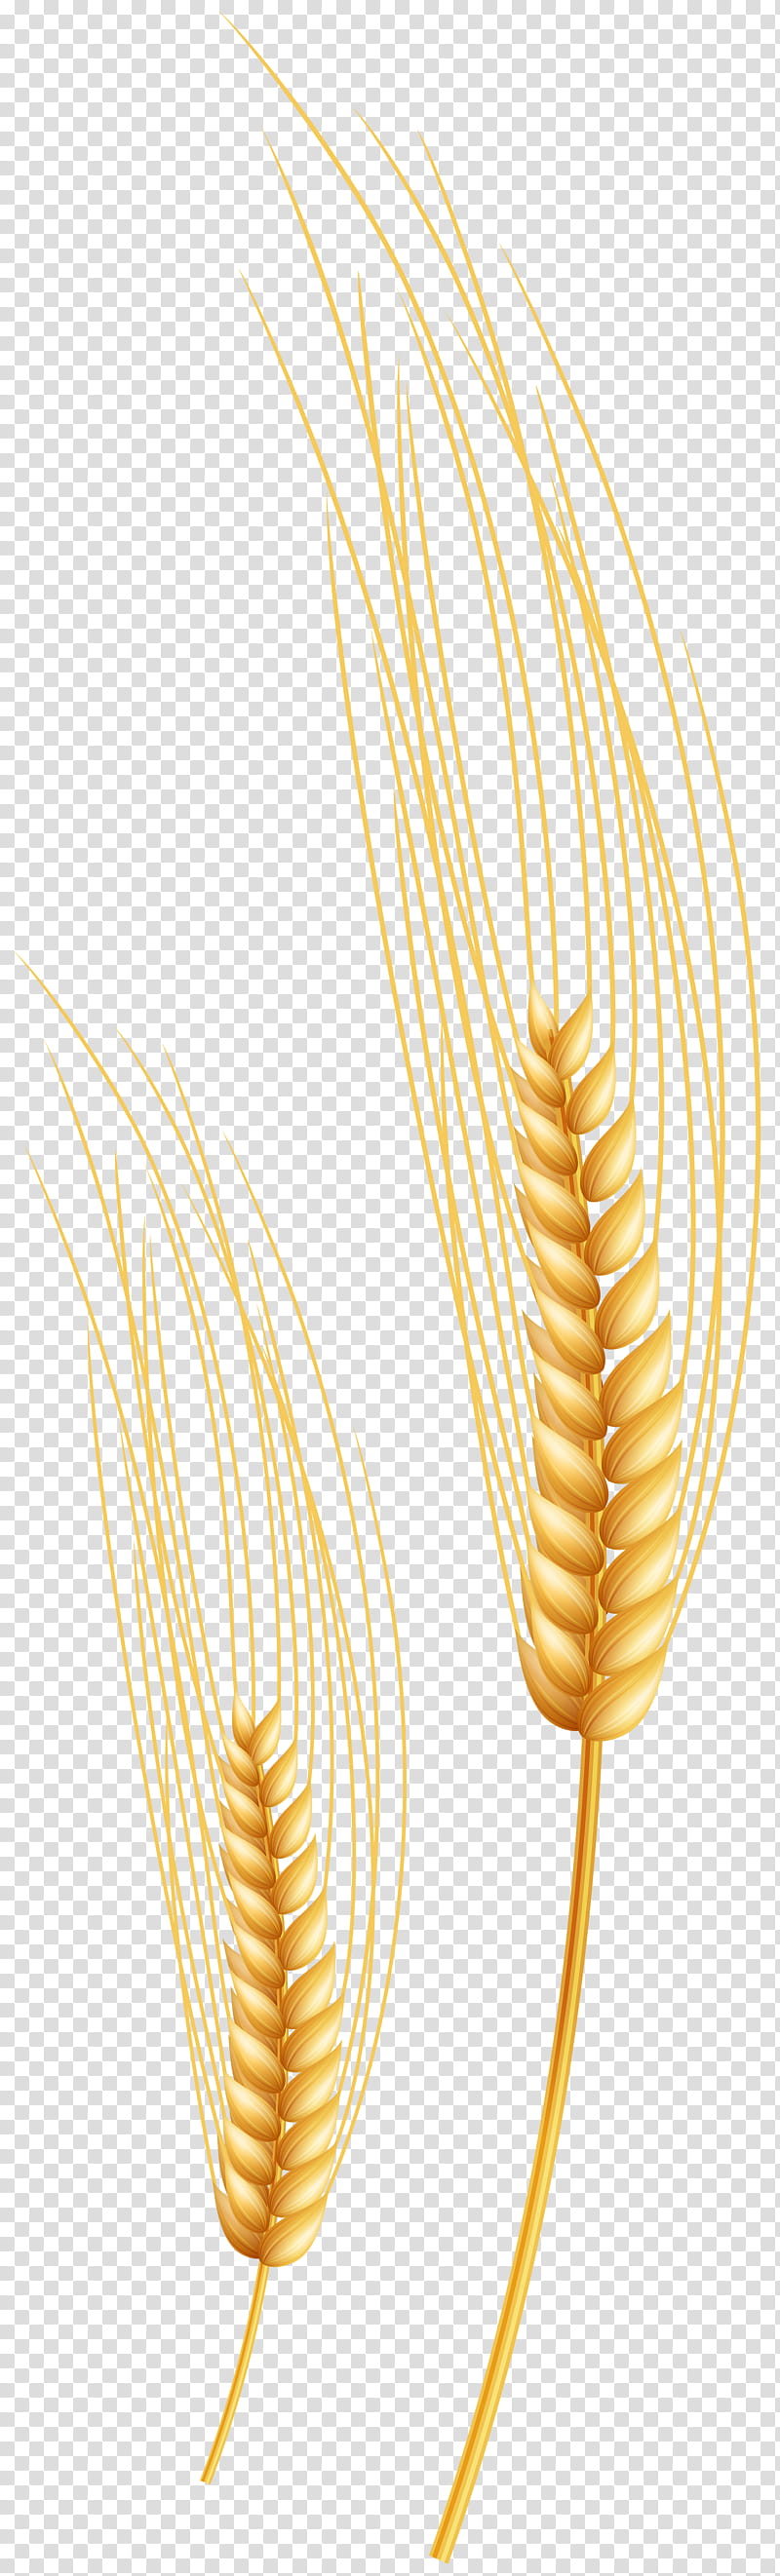 Wheat, Grasses, Peafowl, Art Museum, Commodity, Grass Family, Food Grain, Fusilli transparent background PNG clipart